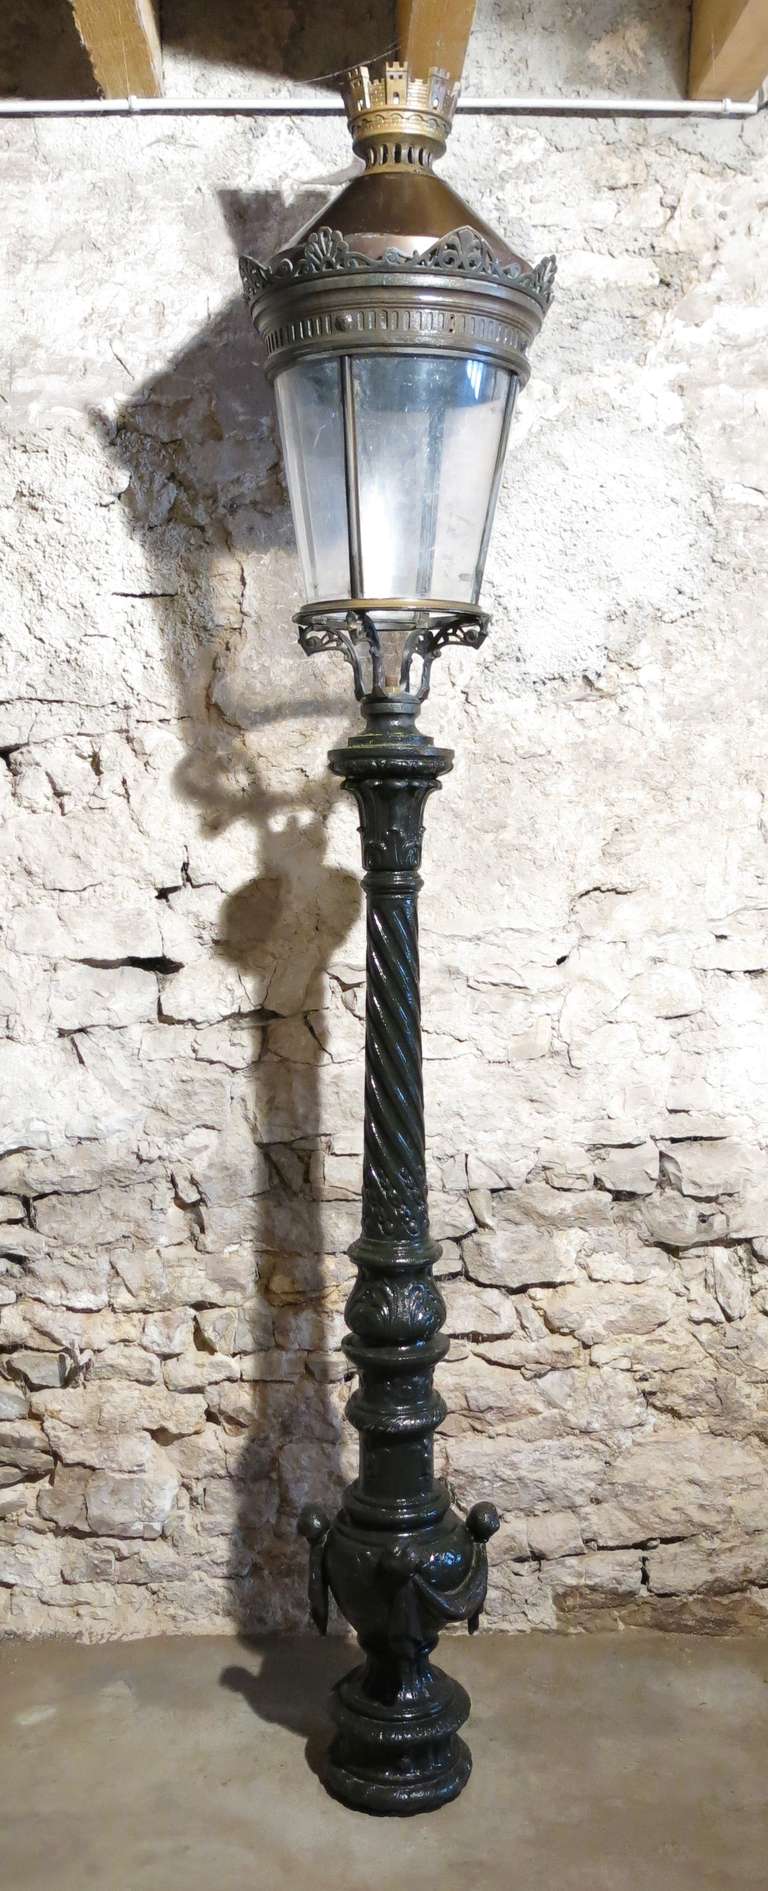 A rare, unique and exquisite quality of French antique Parisian Vendome-square style from Paris, France. Mid-19th century, circa 1850s.

Dimensions of the lantern without the pedestal:
High 36.3 inches x Width 19.7 inches.

Dimensions of the